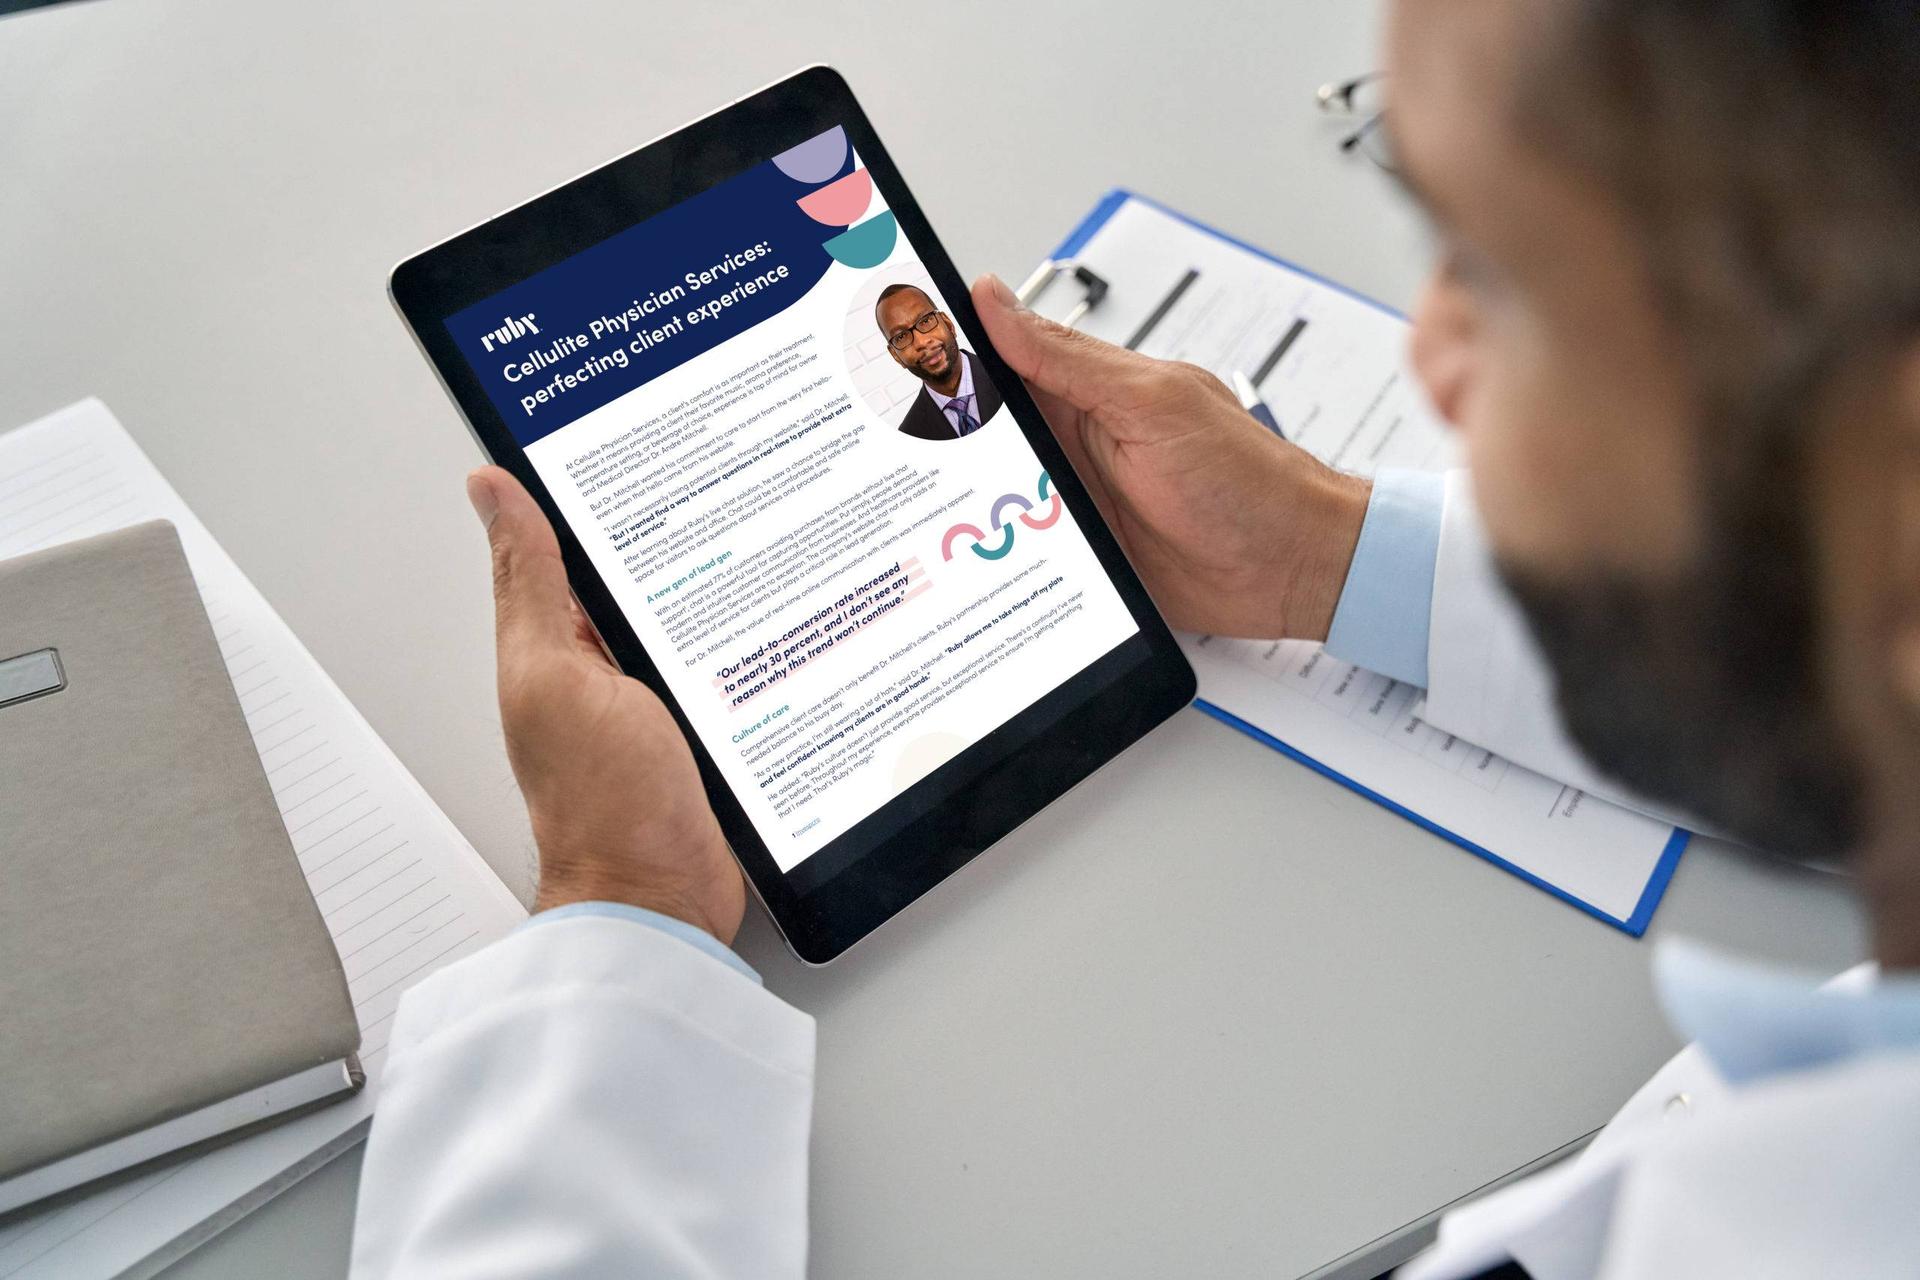 Doctor holding tablet with Ruby's Cellulite Physician Services case study on screen